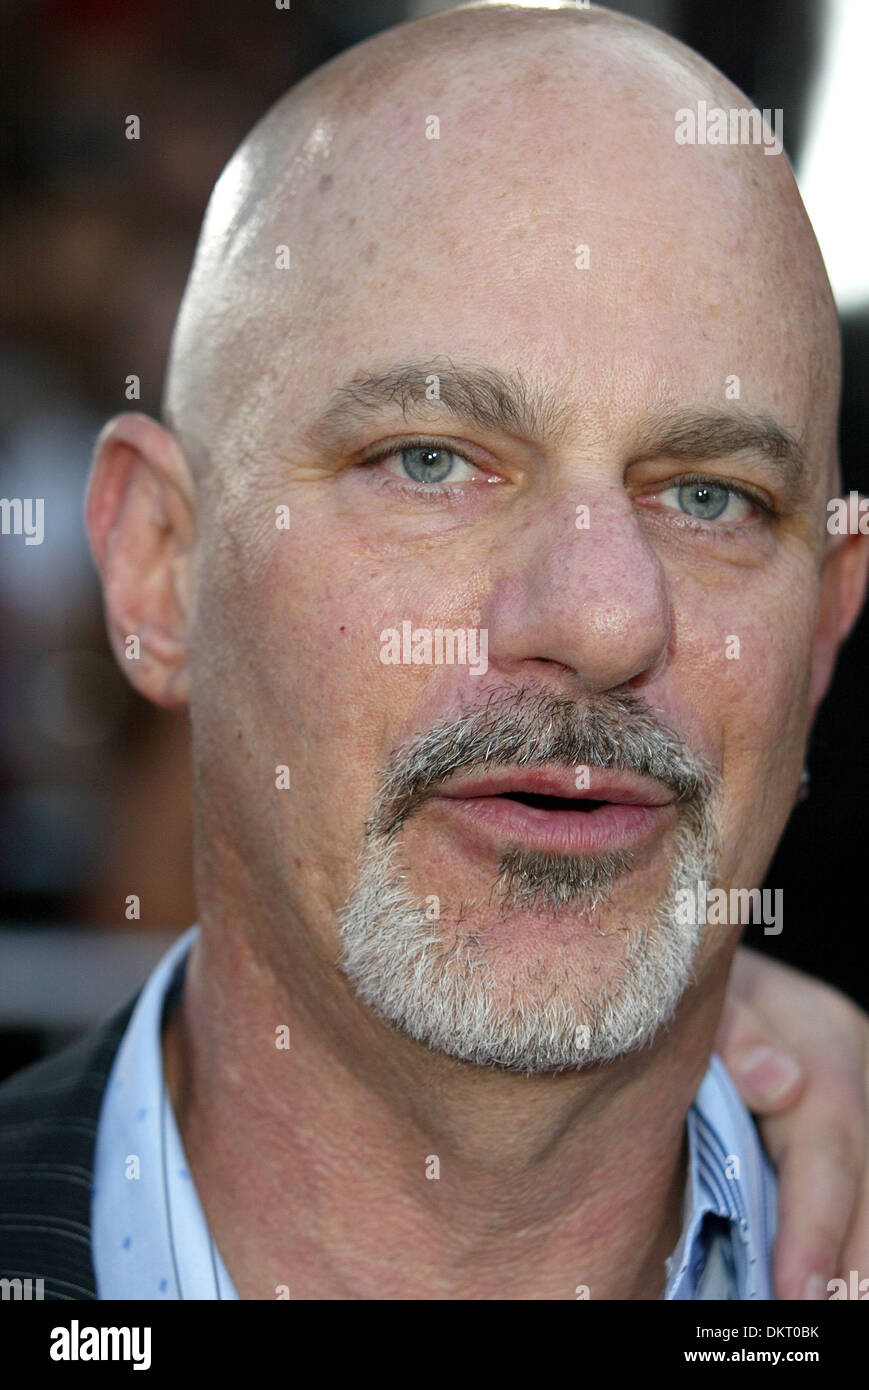 ROB COHEN.FILM DIRECTOR.WESTWOOD, LOS ANGELES, USA.05/08/2002.LAB7060. Stock Photo